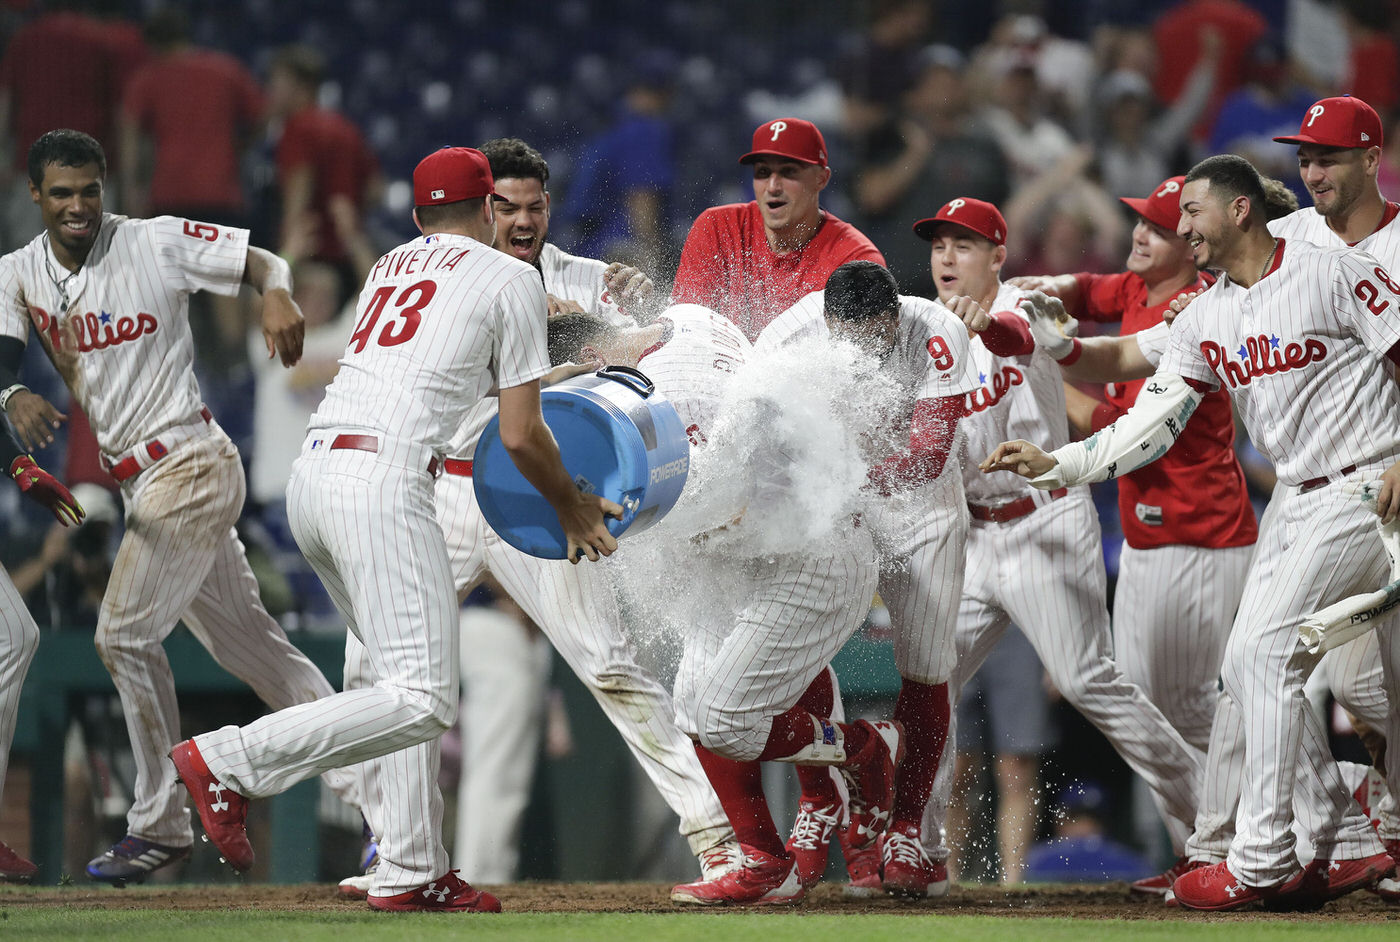 Phillies' Rhys Hoskins unconcerned about Home Run Derby impacting